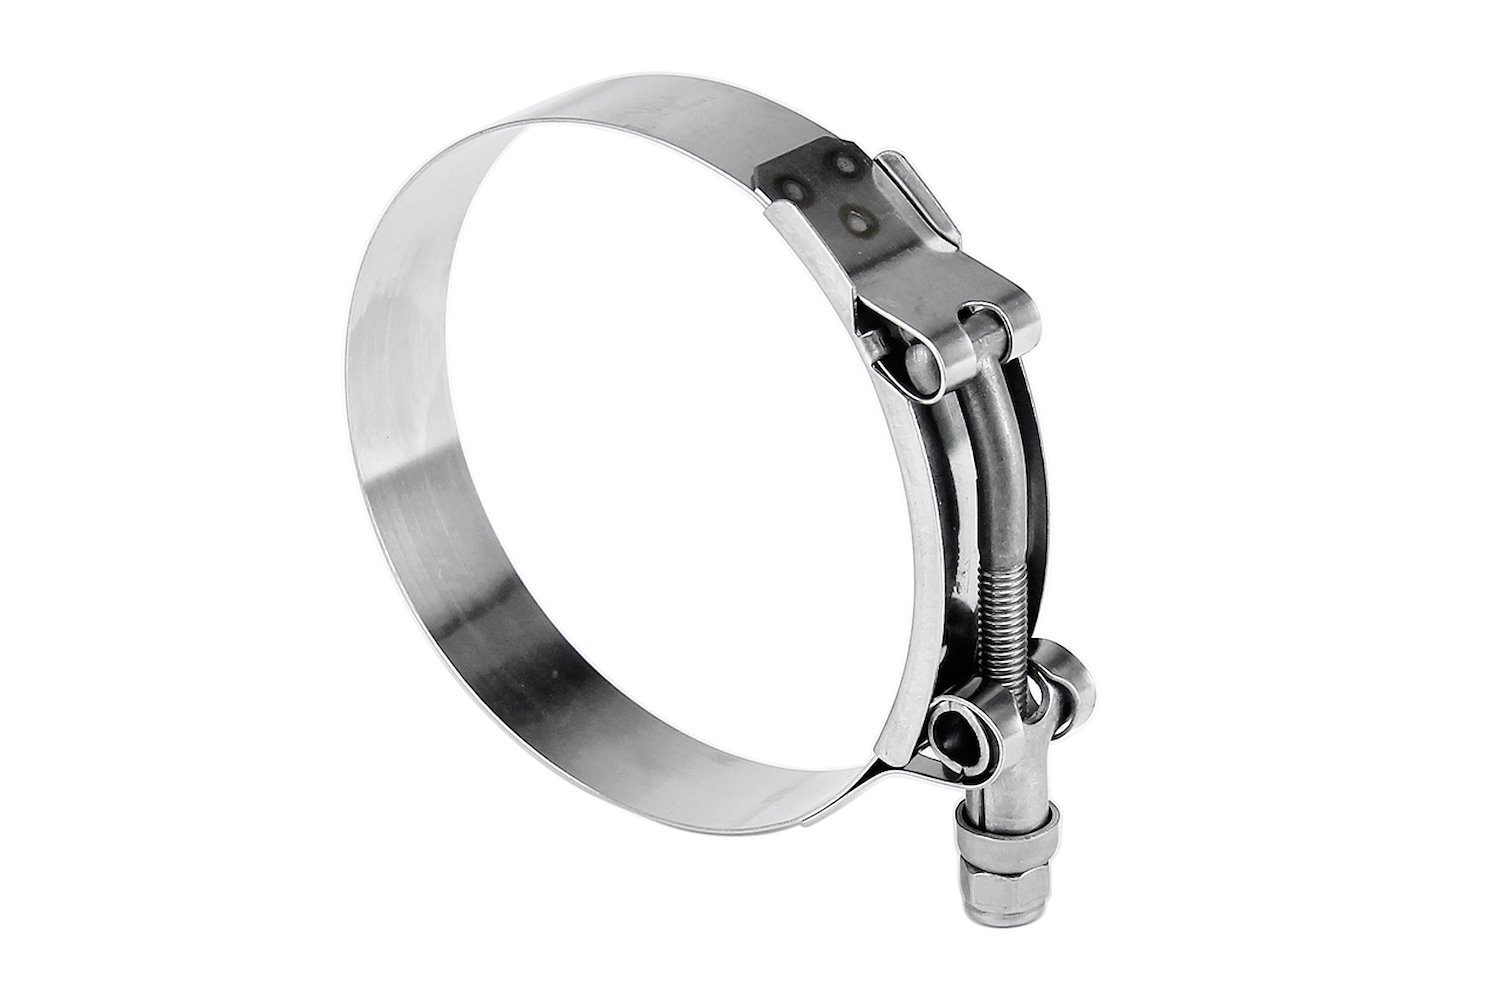 316-SSTC-38-43 100-Percent Marine Grade Stainless Steel T-Bolt Hose Clamp, Effective Range: 1.5 in.- 1.69 in.